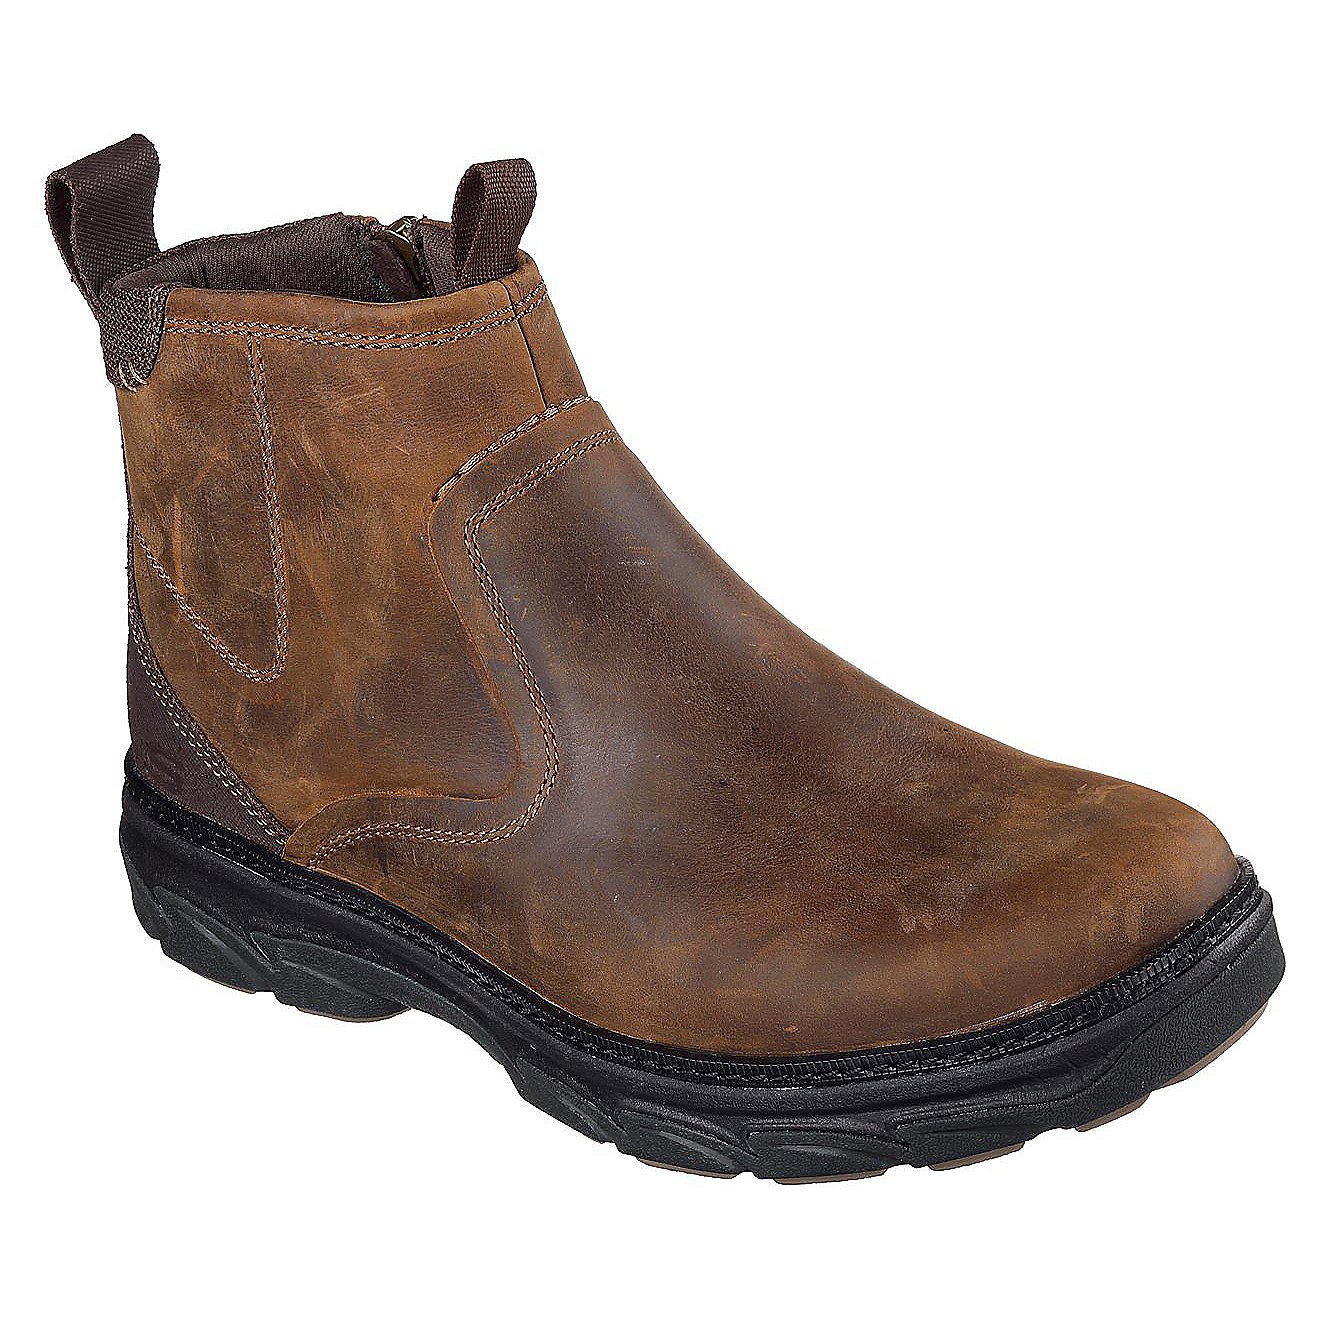 SKECHERS Men's Relaxed Fit Resment Boots                                                                                         - view number 2